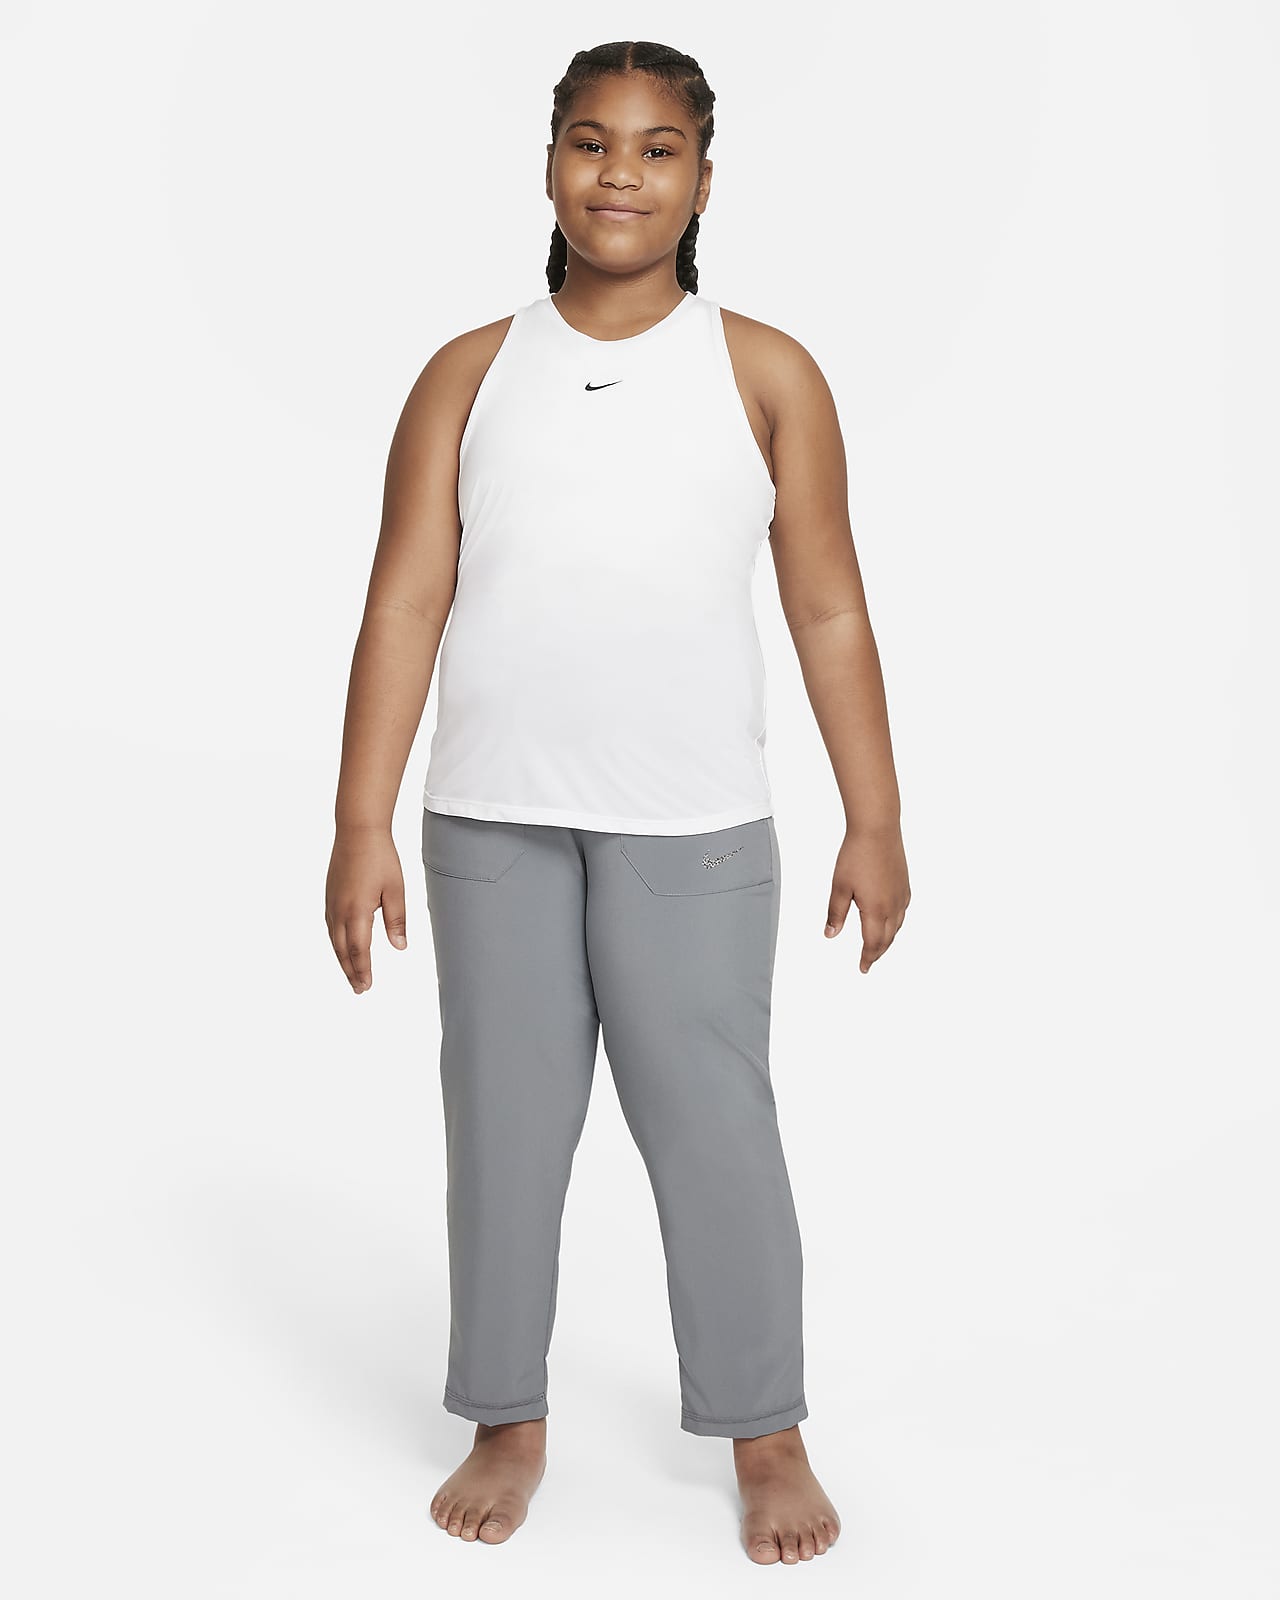 https://static.nike.com/a/images/t_PDP_1280_v1/f_auto,q_auto:eco/dc73b81f-06b7-4f8f-bea3-f50089f1ce65/yoga-dri-fit-big-kids-girls-pants-extended-size-N7BfZt.png